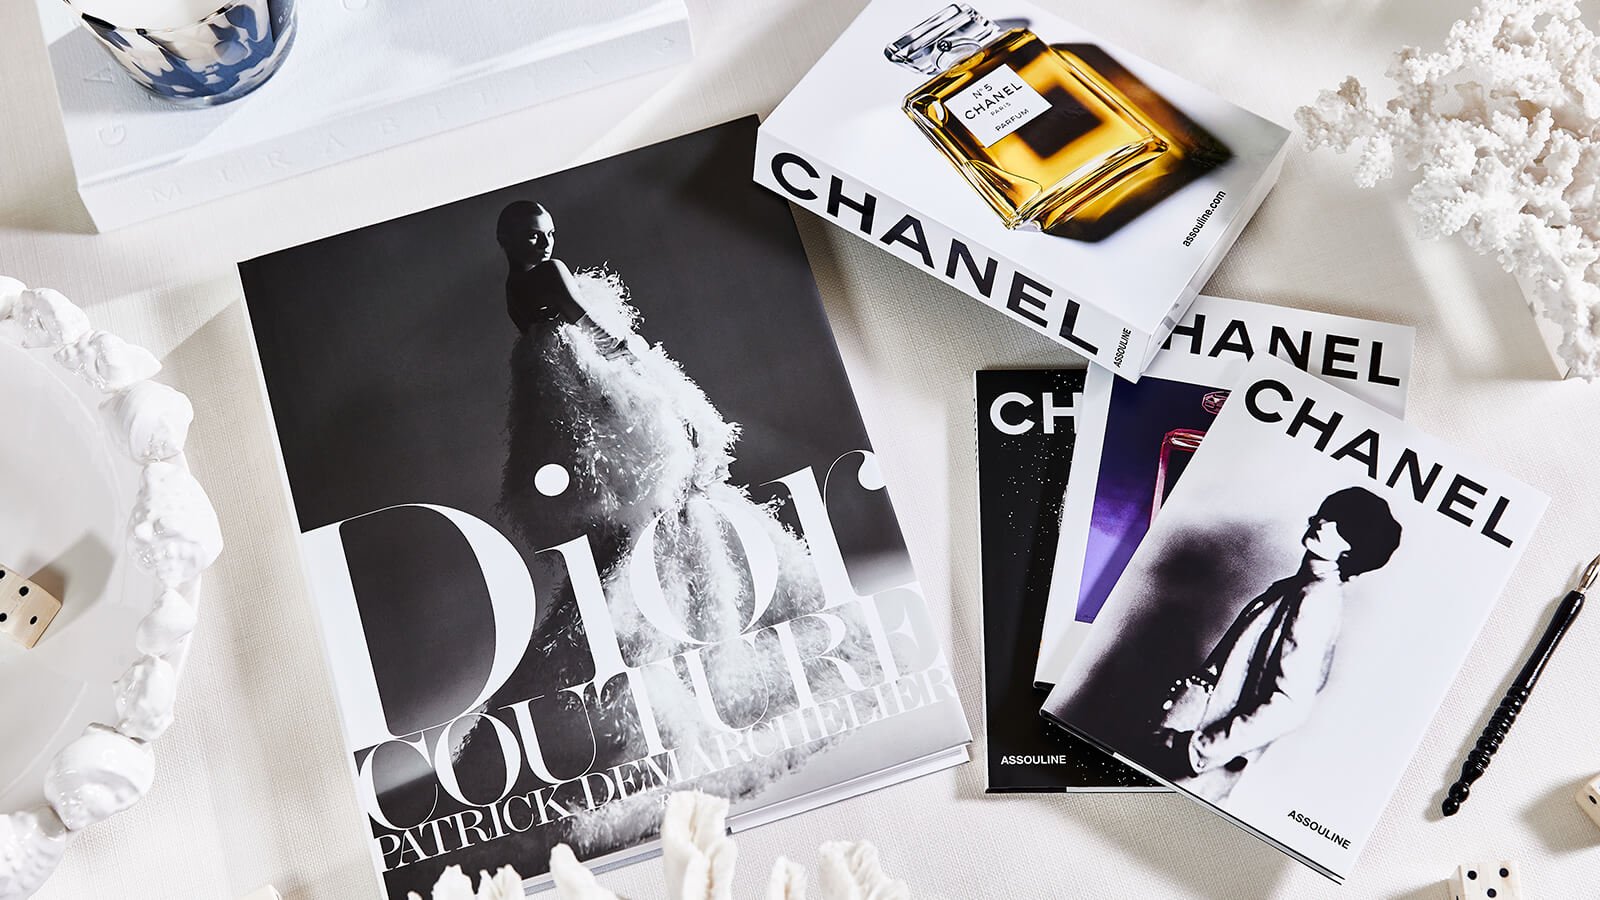 Fashion books - Coffee table books for anyone with an interest in fashion